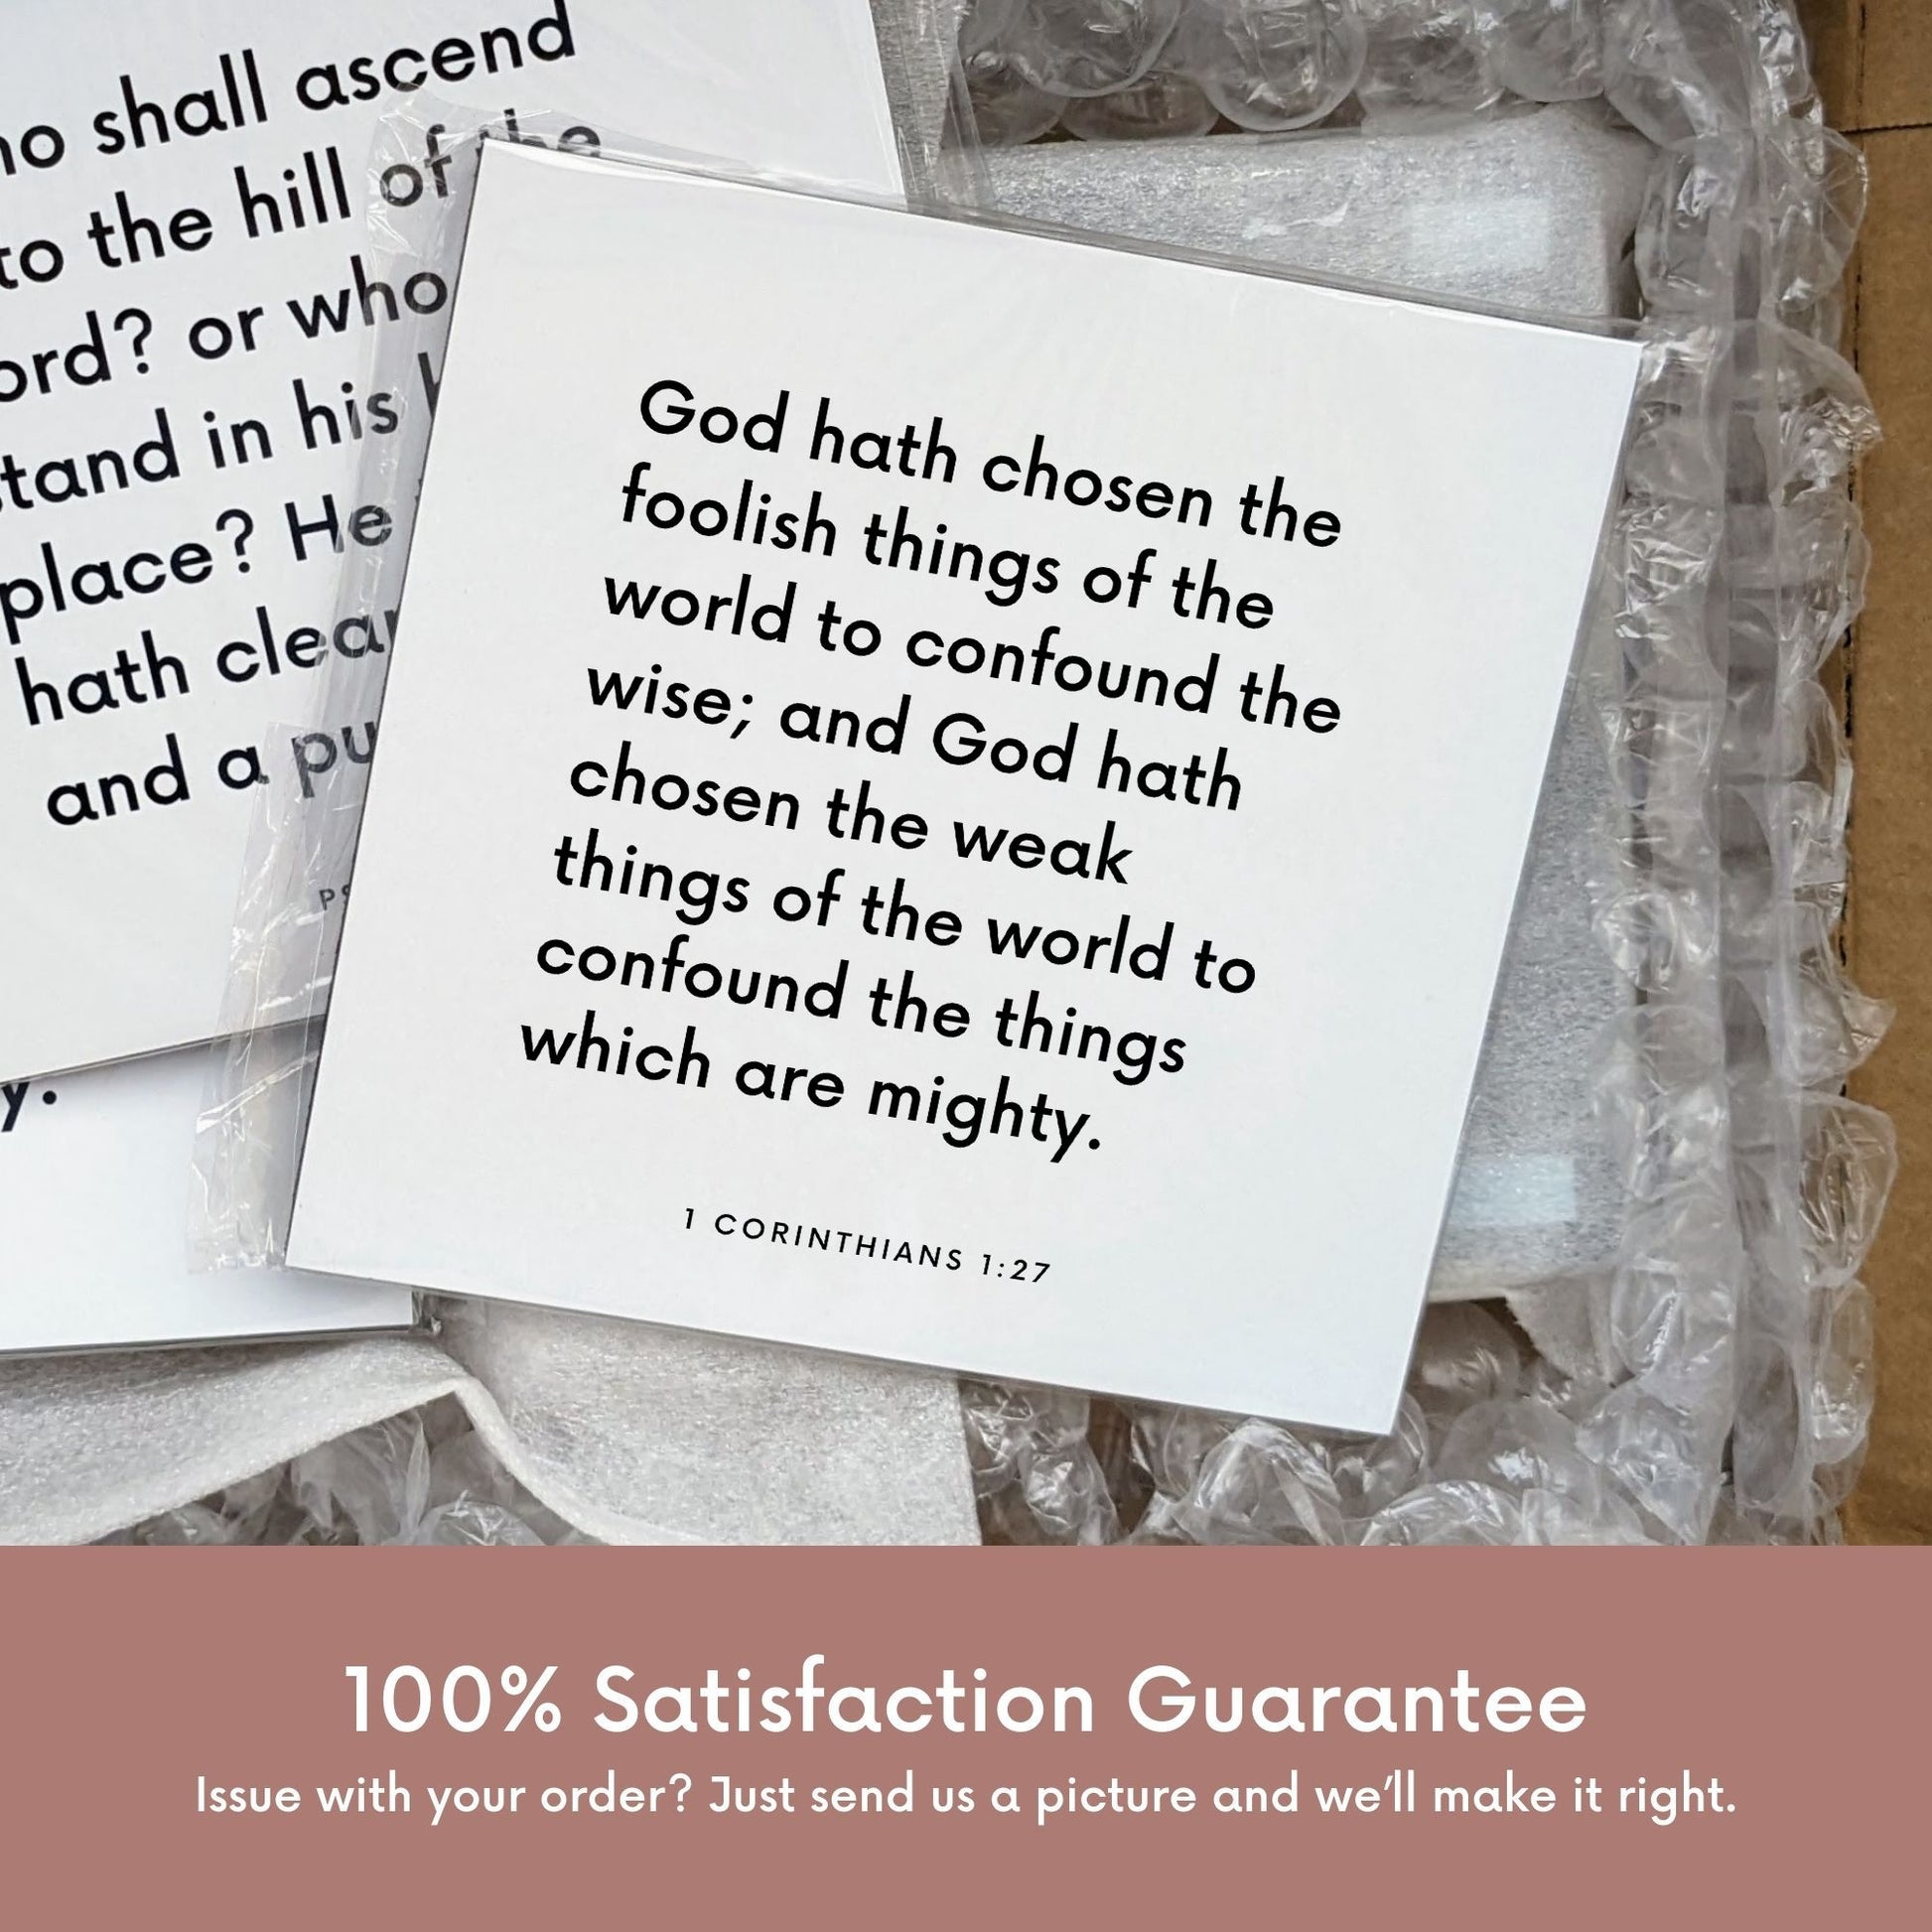 Shipping materials for scripture tile of 1 Corinthians 1:27 - "God hath chosen the foolish things of the world"